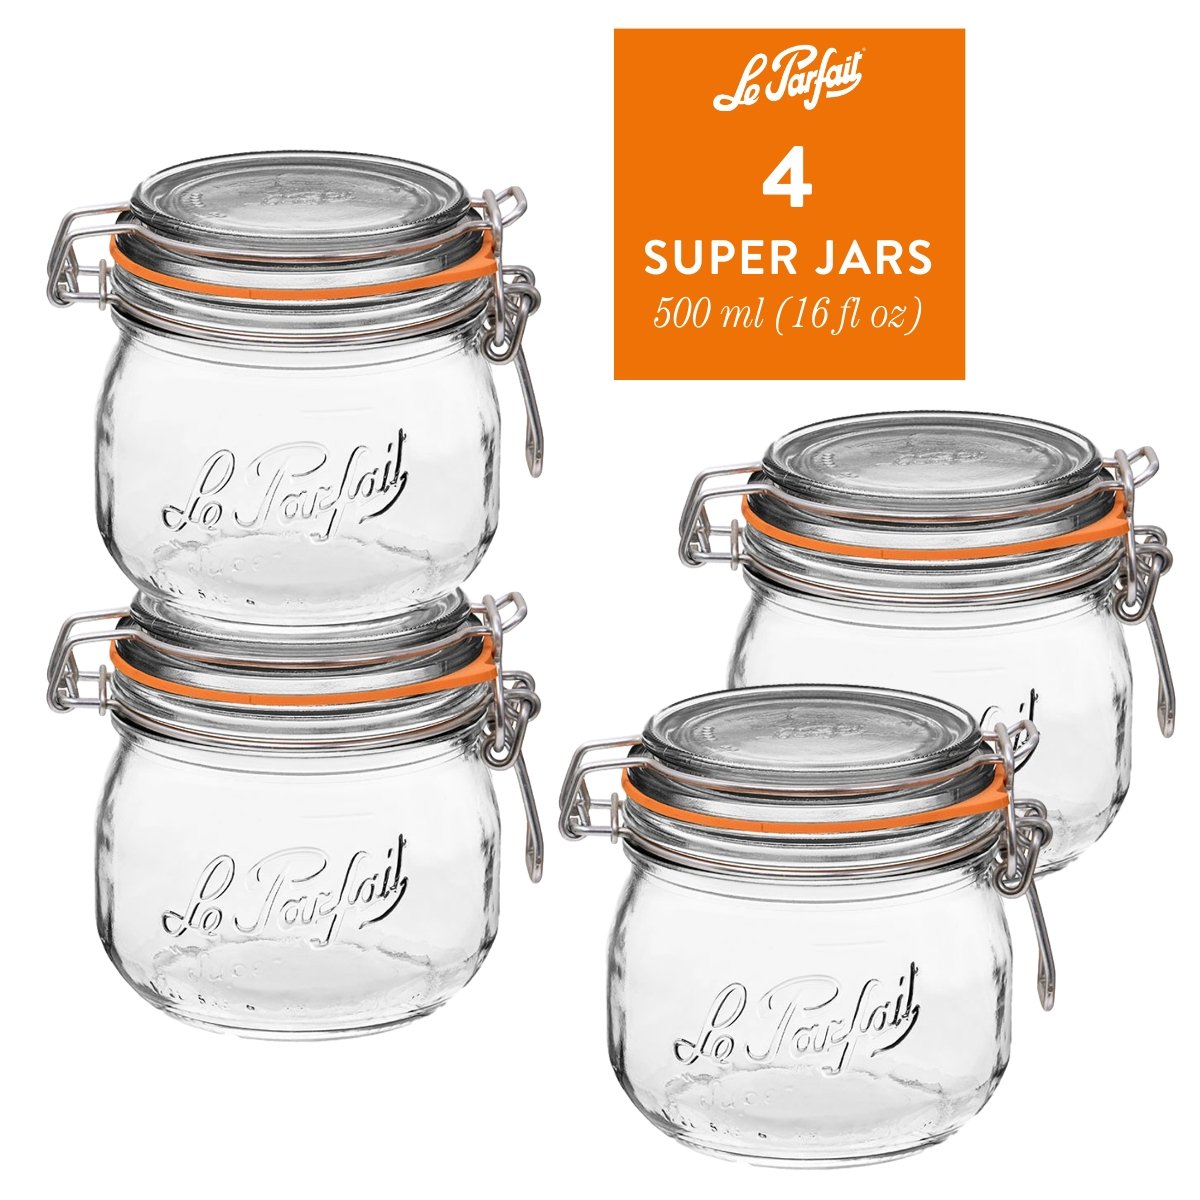 Le Parfait Super Jars – French Glass Round Jars With Airtight Lid For  Canning Food Storage, 3 pk / 48 fl oz - Harris Teeter